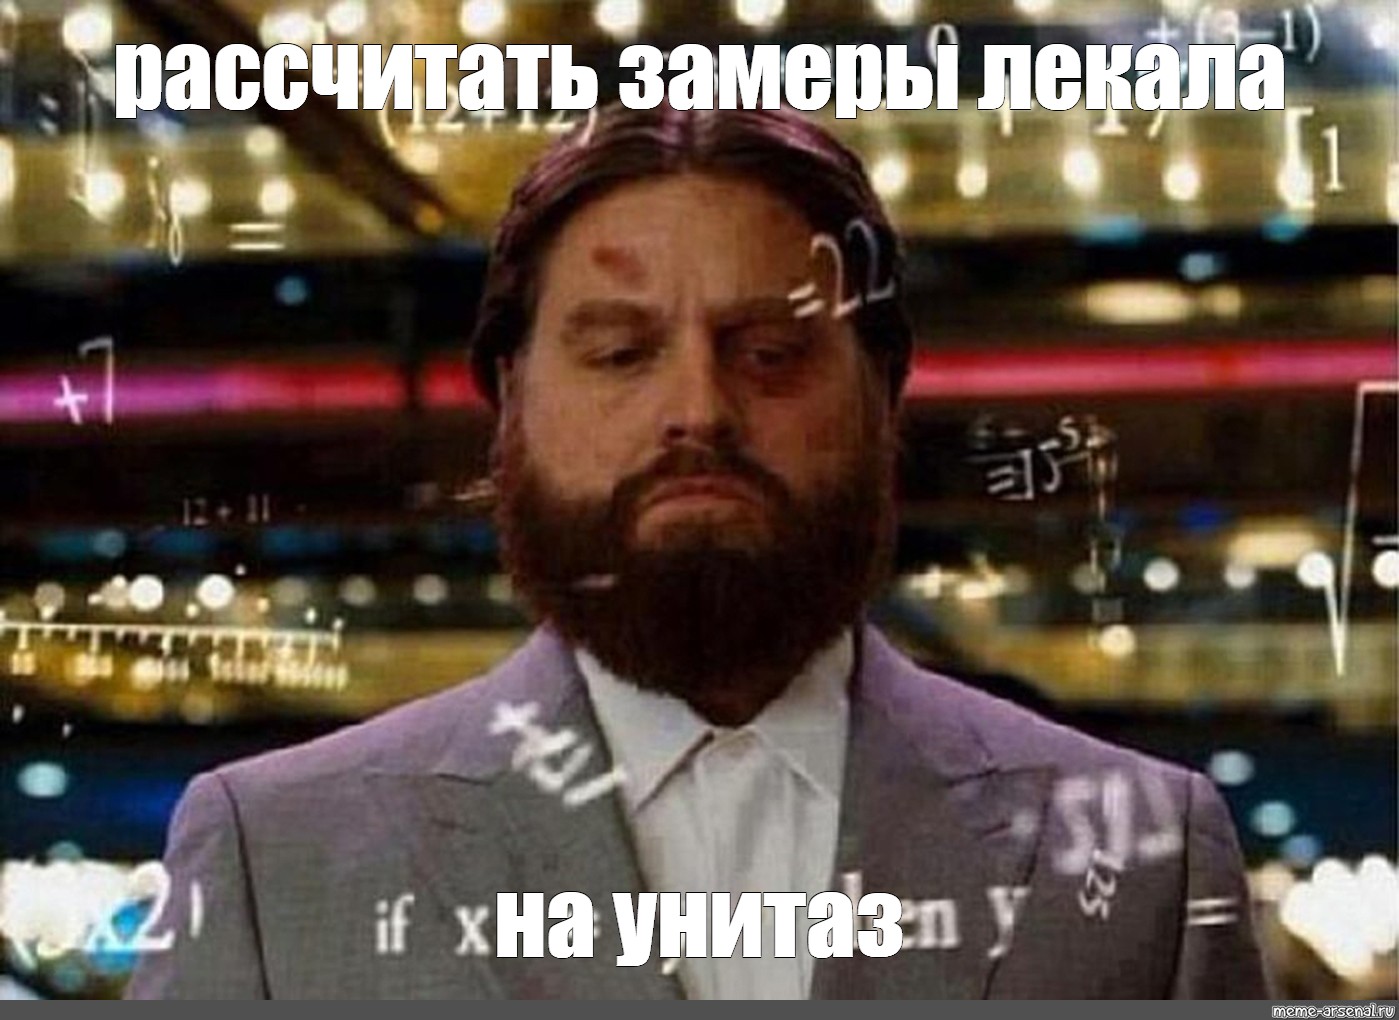 Meme "Zach Galifianakis calculations, the hangover meme with the